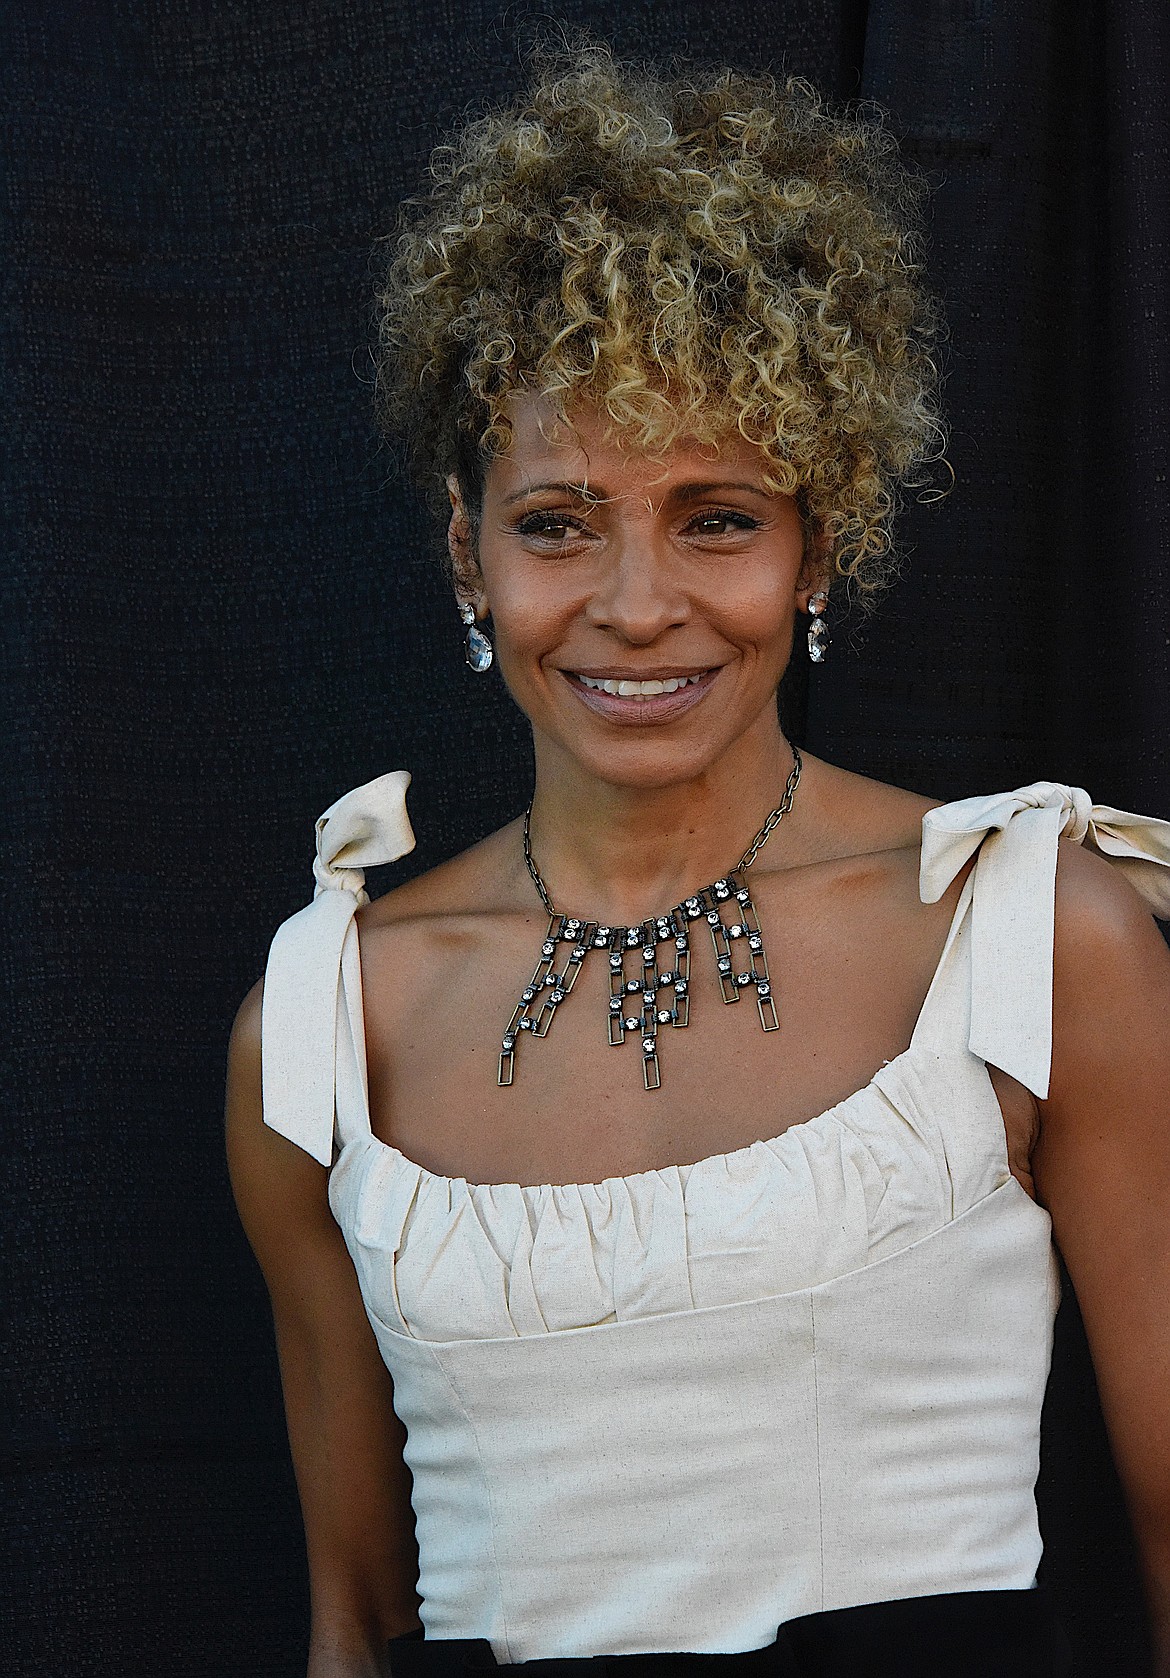 Michelle Hurd, who stars as Kat in "Somewhere in Montana," takes a turn on the red carpet. (Berl Tiskus/Leader)